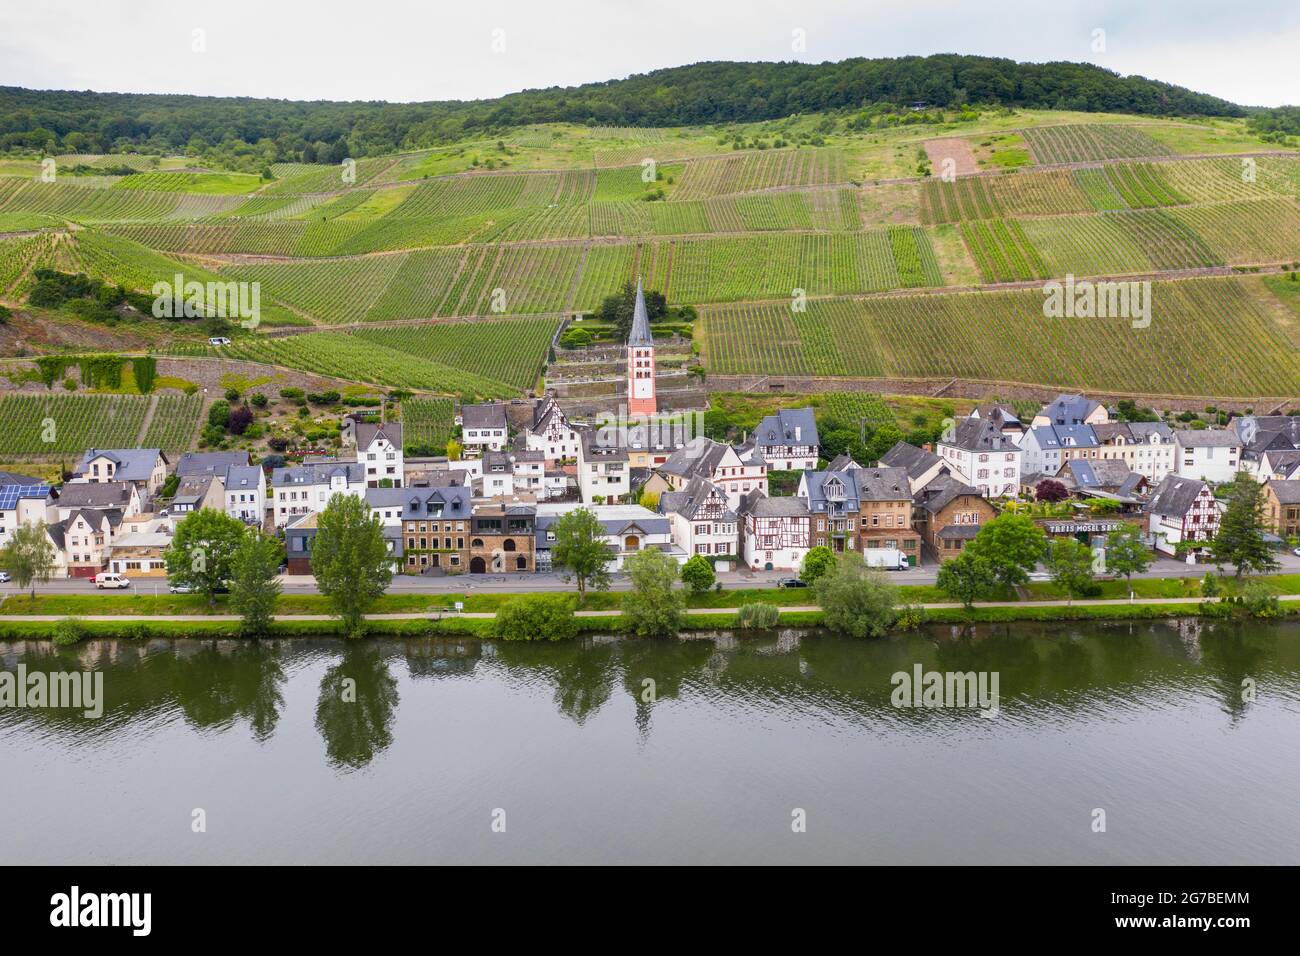 The town of Zell on the Moselle, Moselle valley, Germany Stock Photo